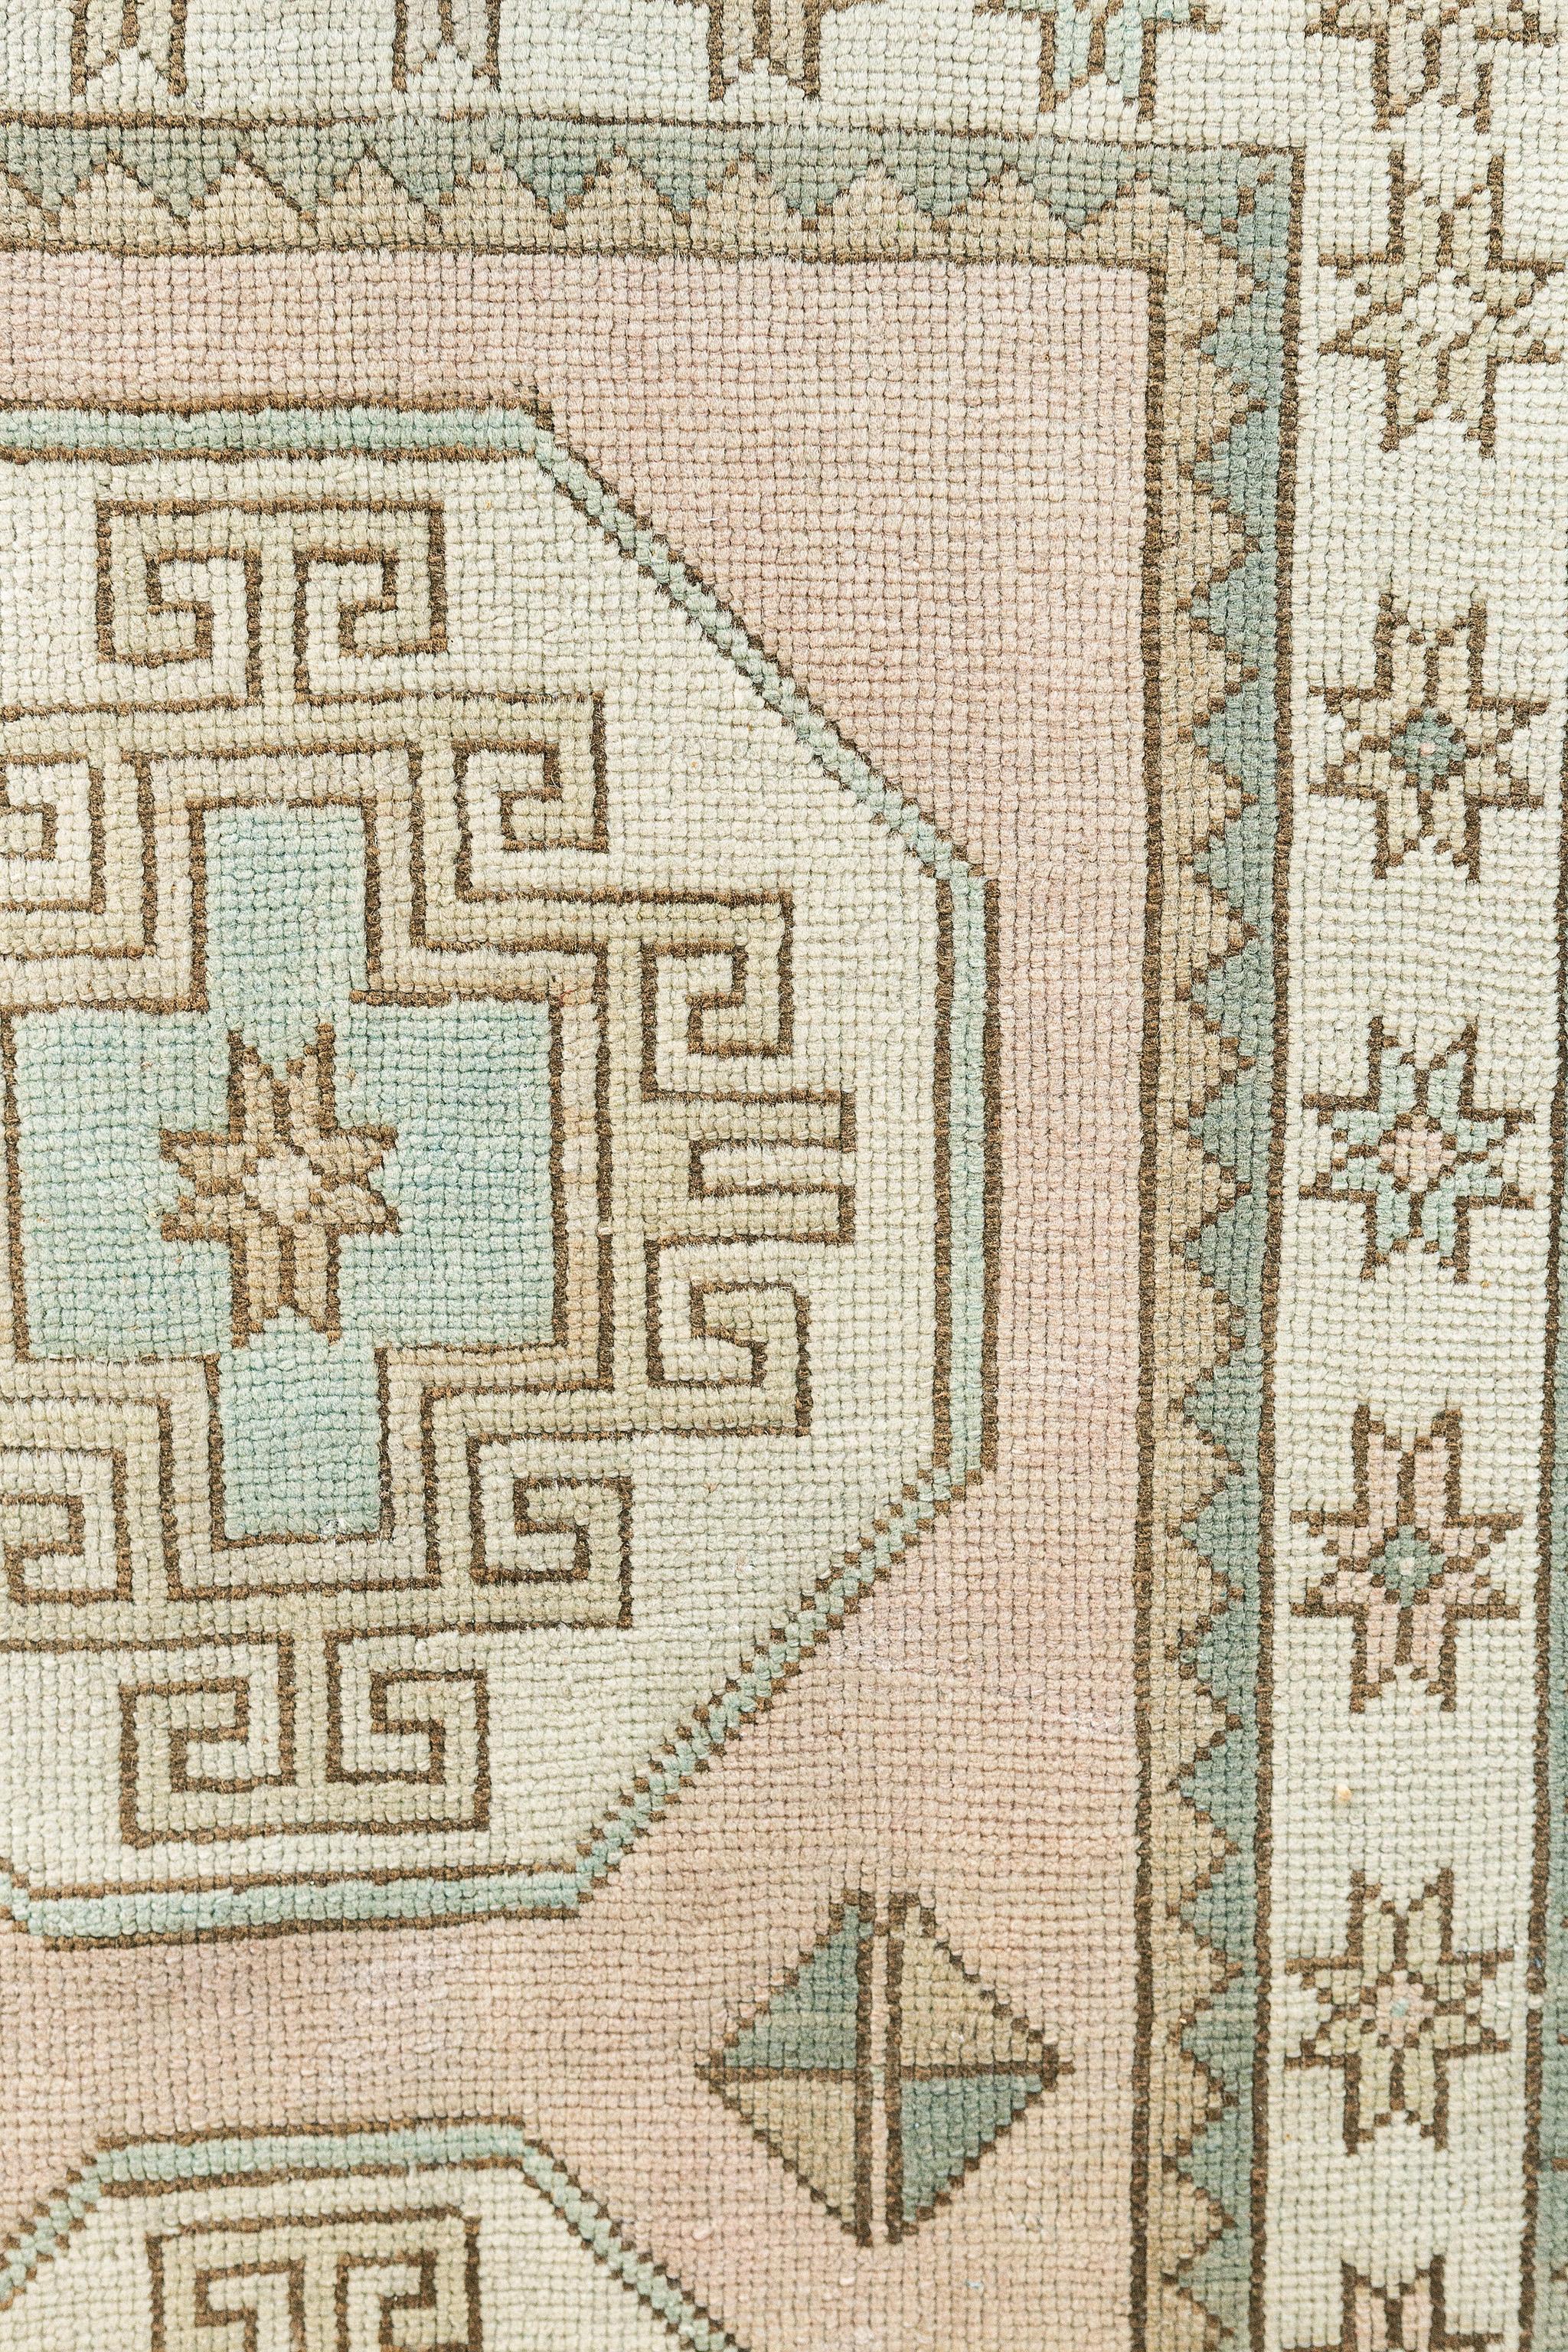 A simplicity through its beauty of a hand-spun wool Oushak Runner is detailed from the blushing pink to the coldest cream of the geometric elements and medallions. It creates a soulful balance of everything from modern decor to contemporary